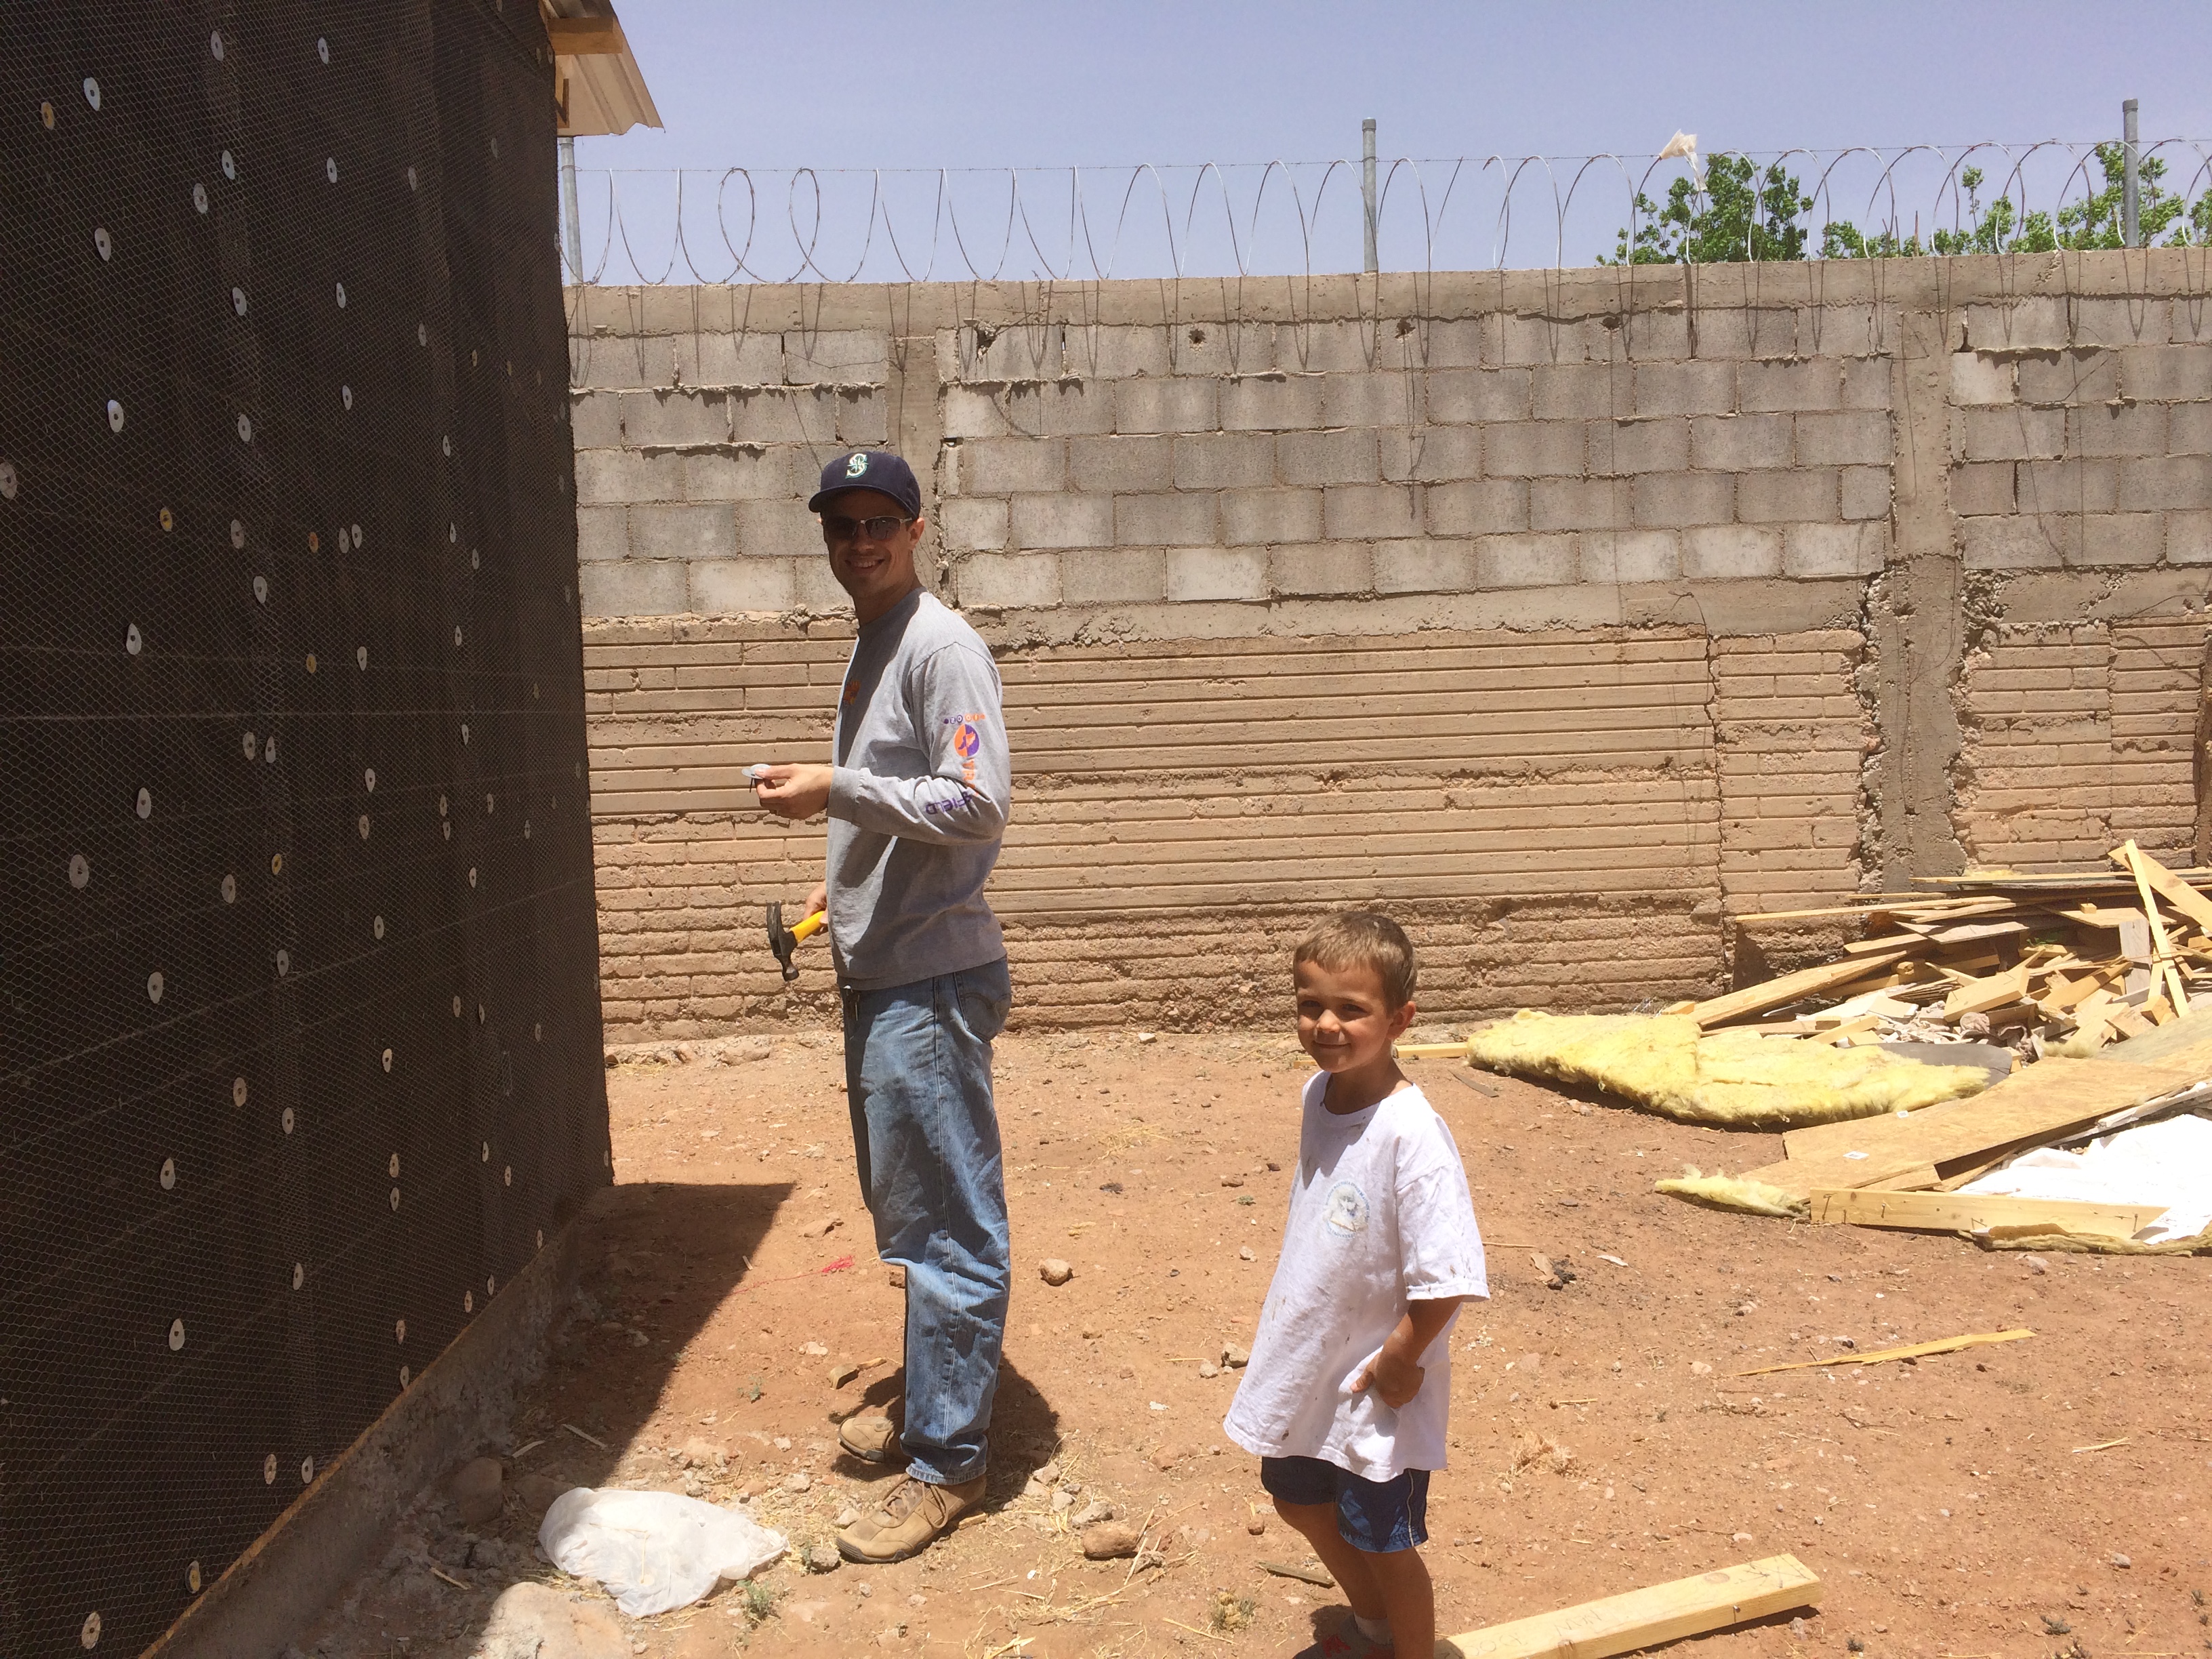 Jordan and Titus, standing in front of an unfinished outer wall for the new Jireh church building